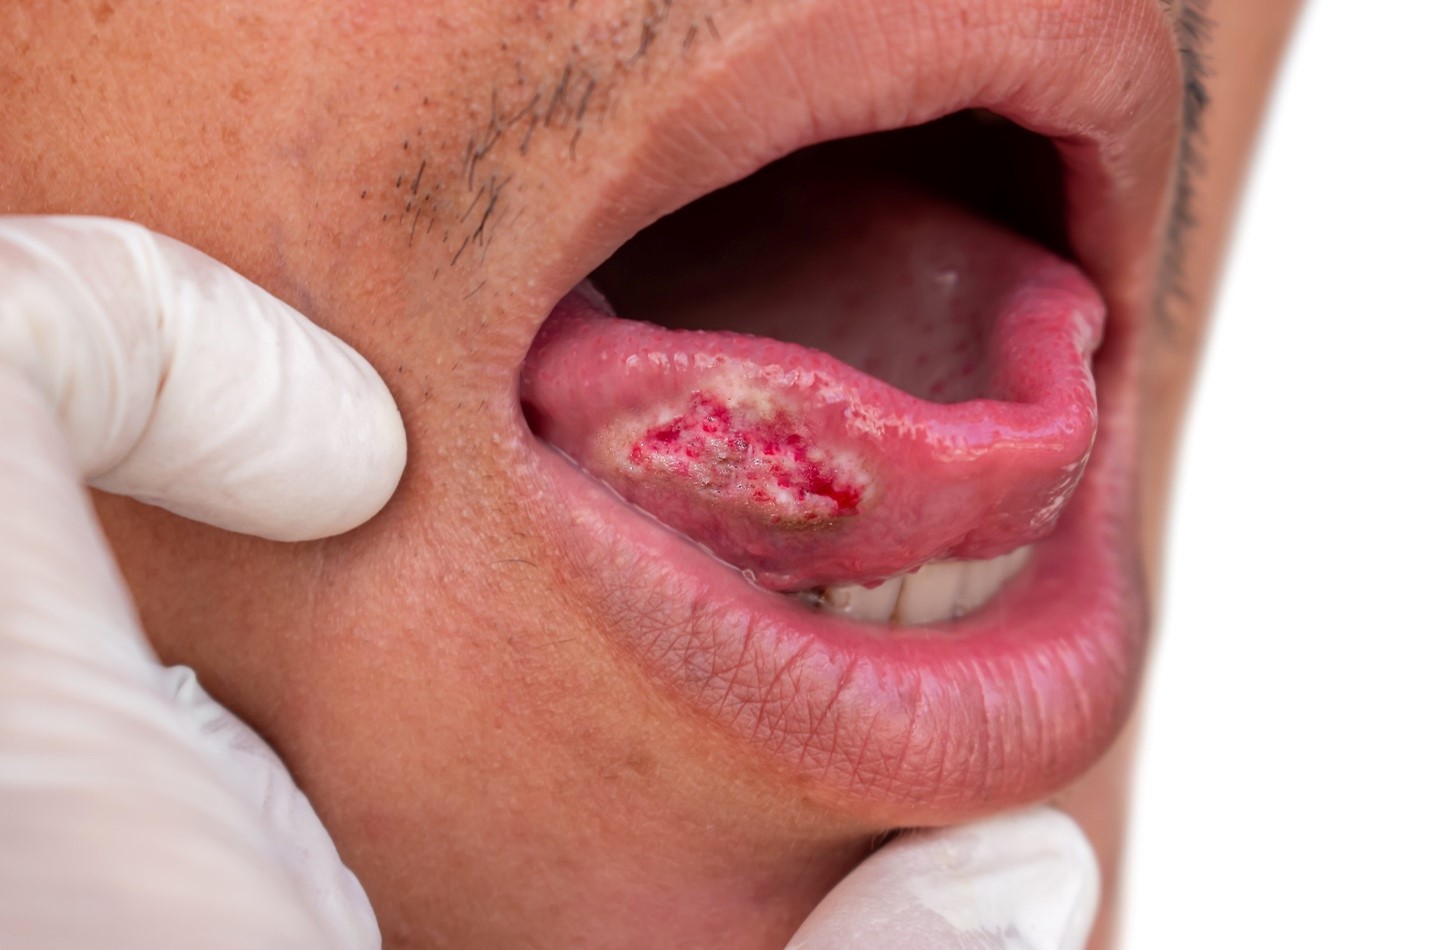 Oral cancer: A multicenter study